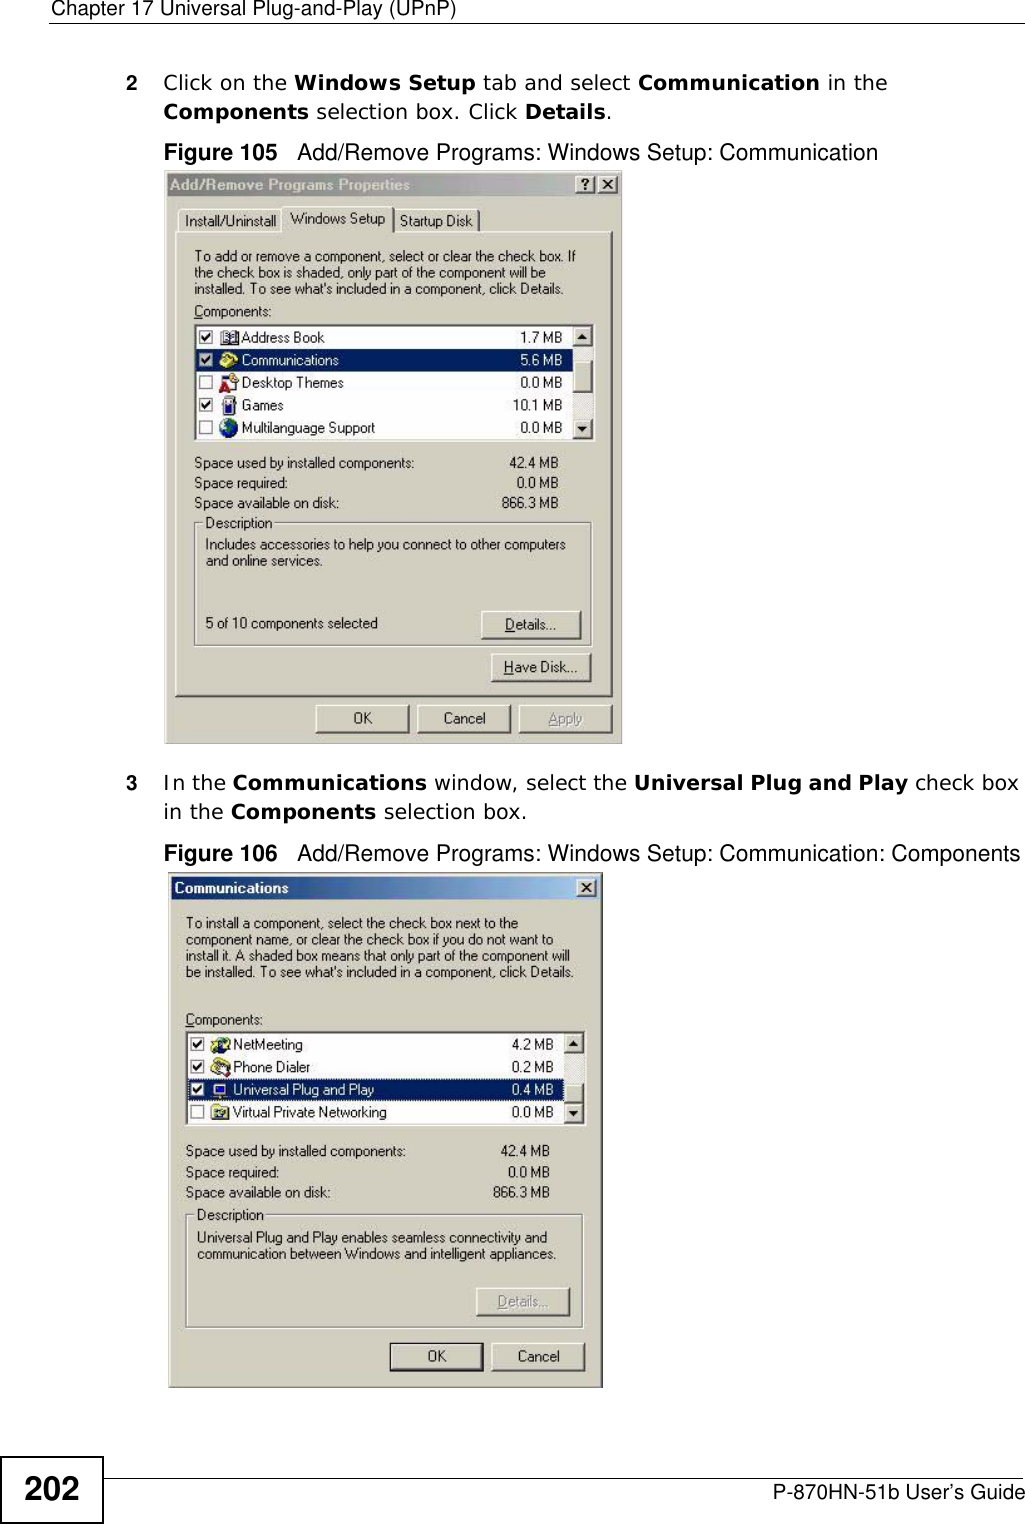 Chapter 17 Universal Plug-and-Play (UPnP)P-870HN-51b User’s Guide2022Click on the Windows Setup tab and select Communication in the Components selection box. Click Details. Figure 105   Add/Remove Programs: Windows Setup: Communication 3In the Communications window, select the Universal Plug and Play check box in the Components selection box. Figure 106   Add/Remove Programs: Windows Setup: Communication: Components